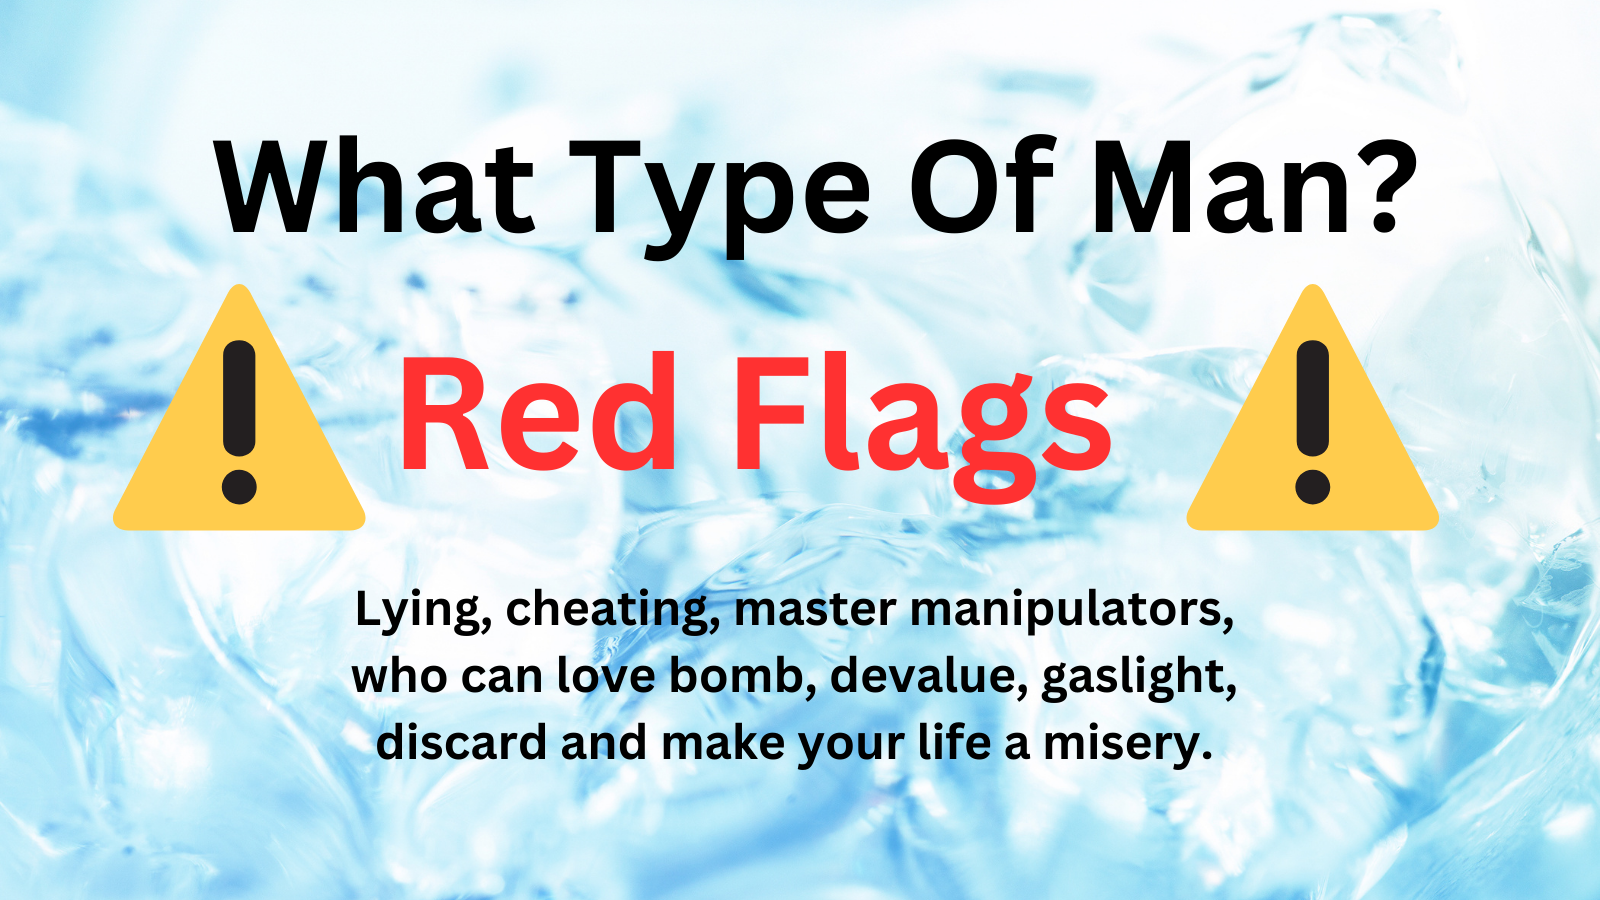 Red Flags - What Type Of Man?